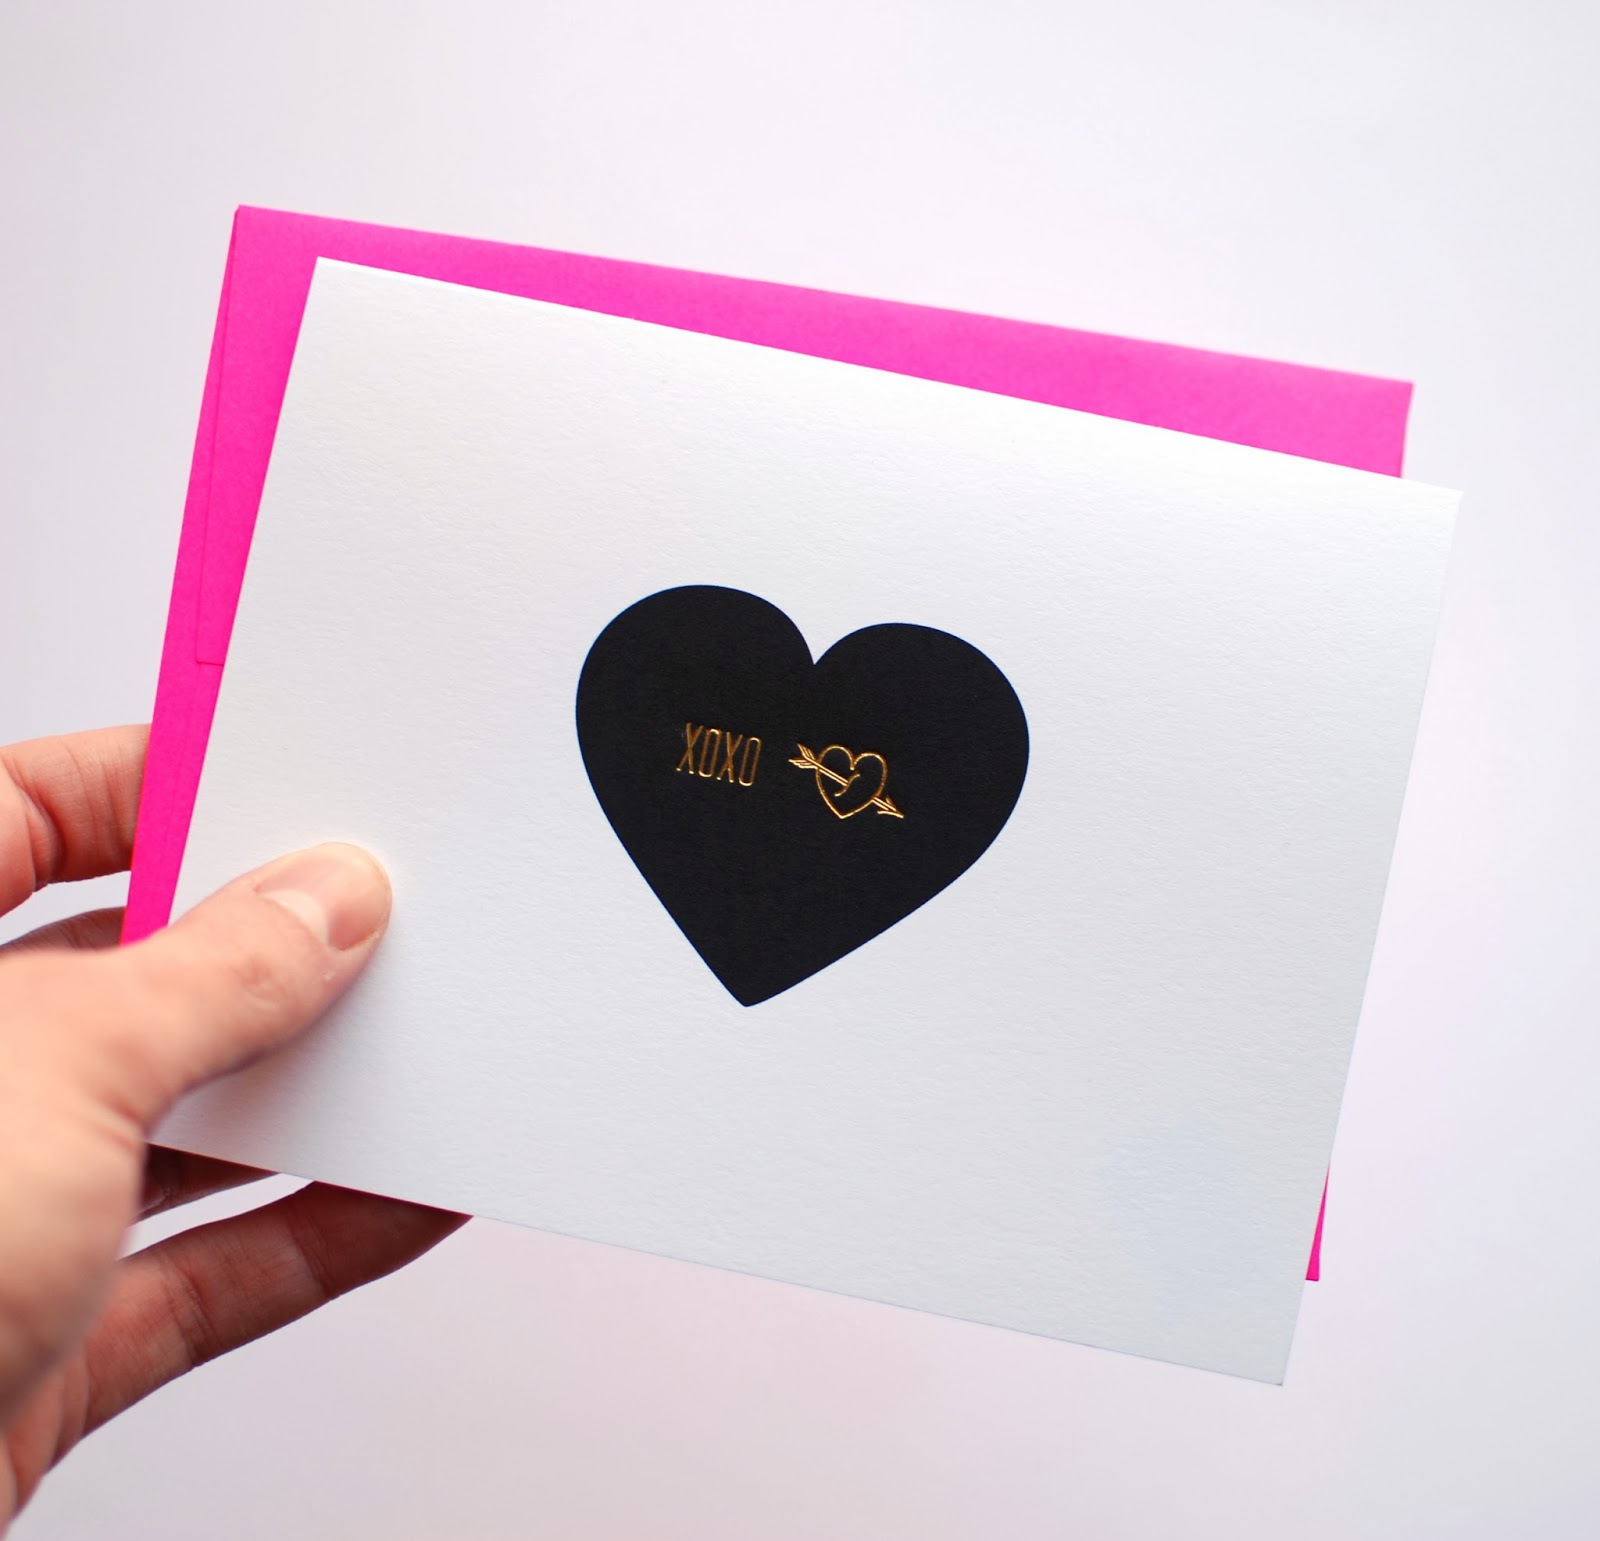 https://www.etsy.com/listing/176814929/valentine-card-valentines-day-card-gold?ref=shop_home_active_5